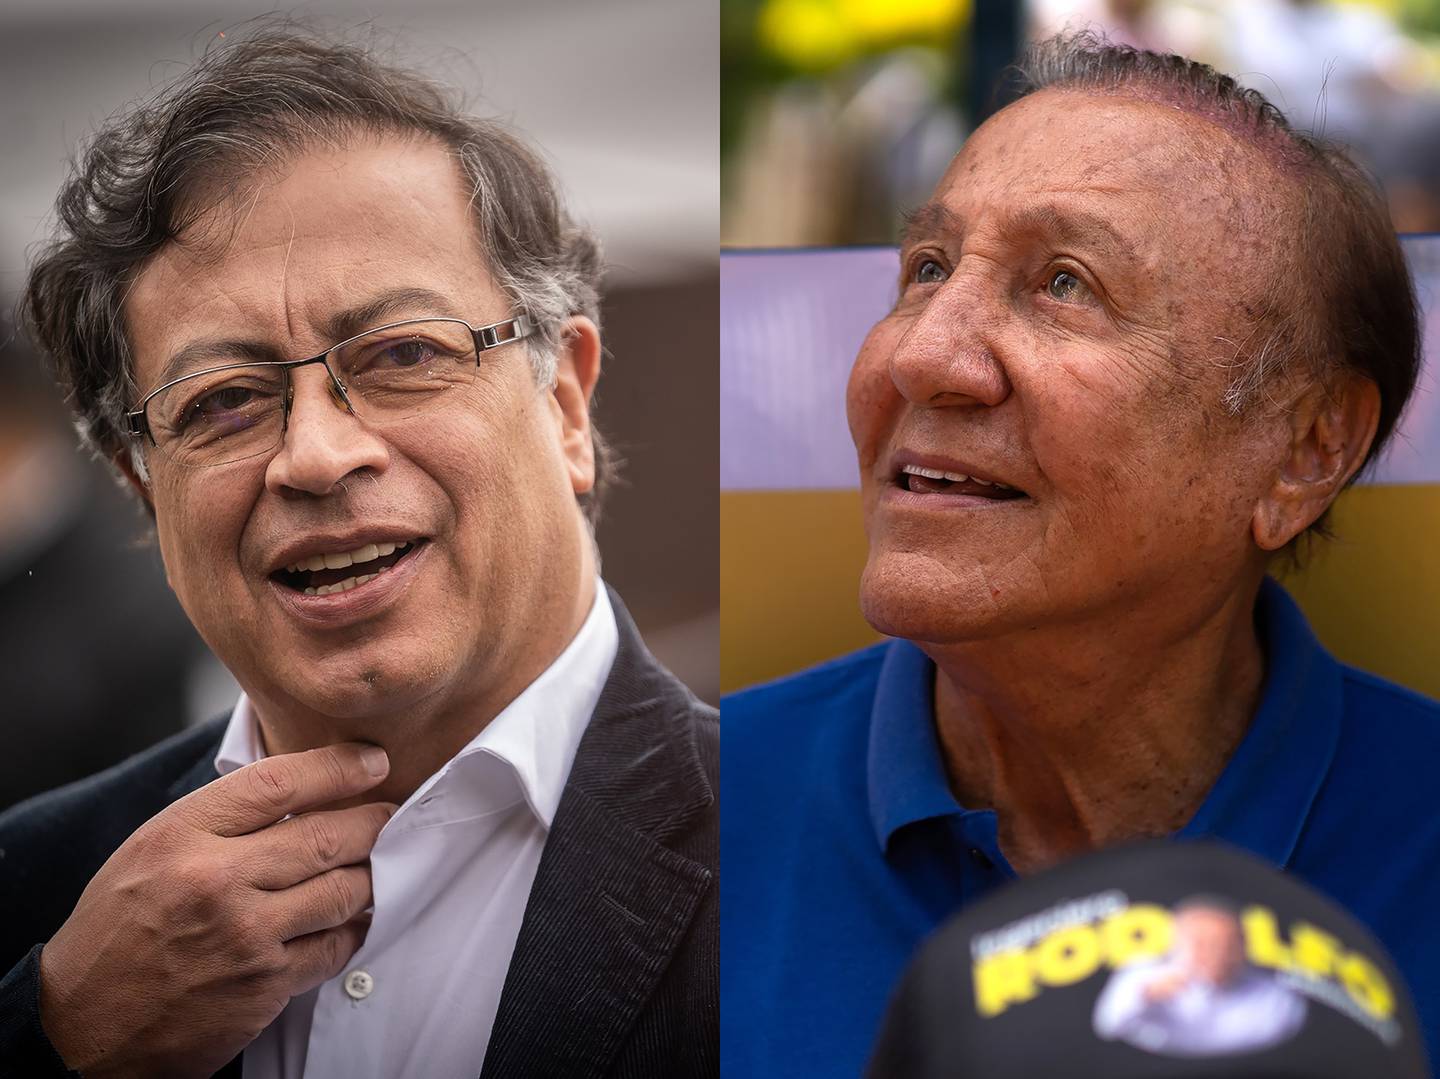 Gustavo Petro and Rodolfo Hernández will face each other in the presidential runoff in Colombia on June 19. (Image source: Bloomberg)